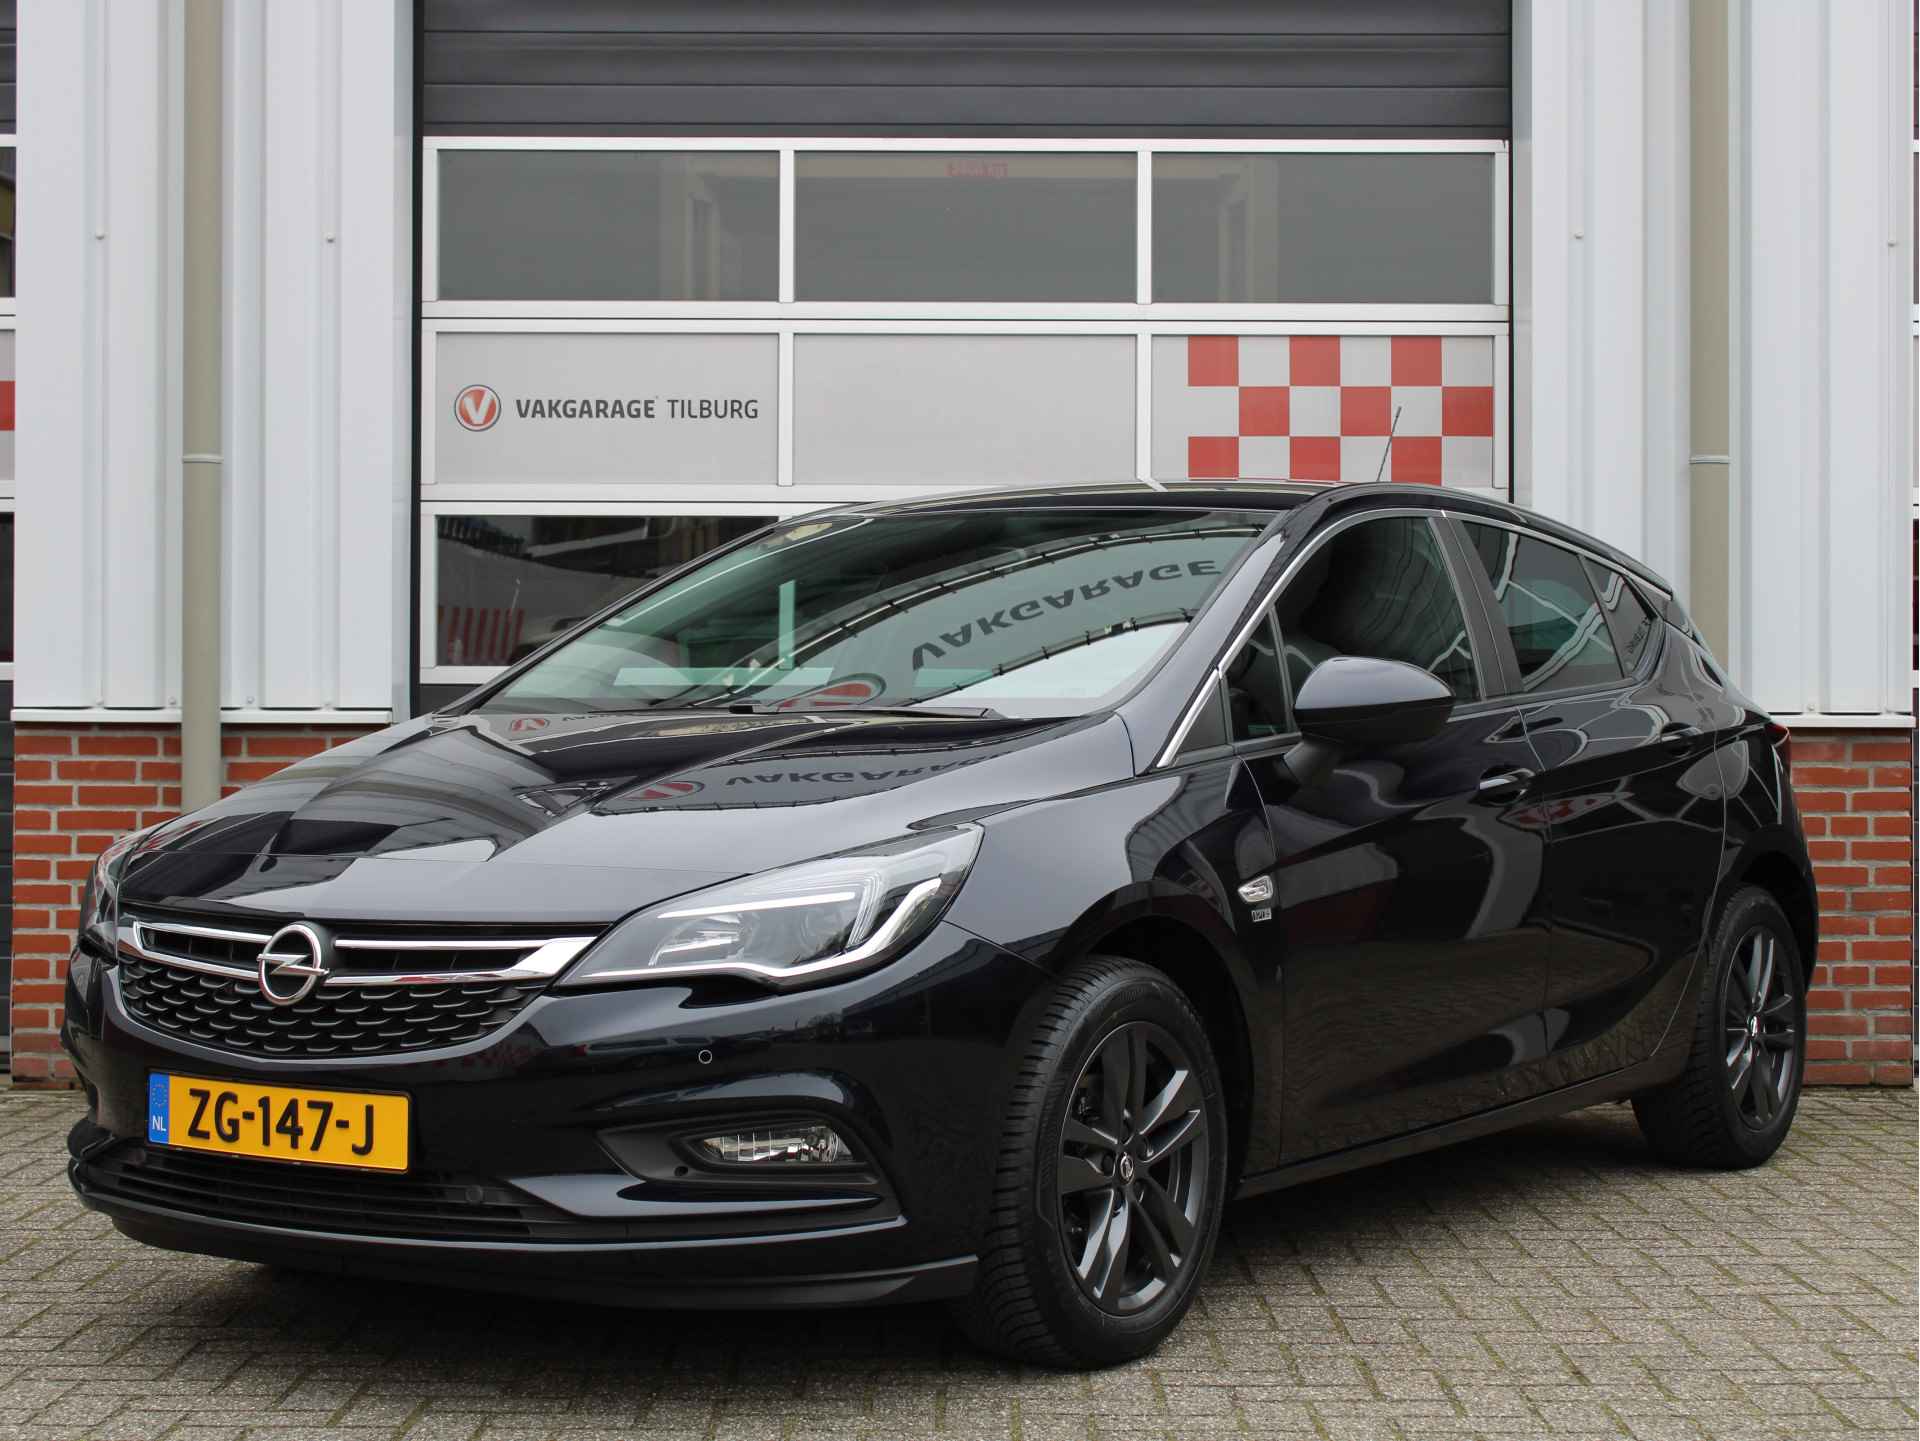 Opel Astra 1.4 Turbo 120Jaar Edition 150PK Automaat /NAVI/PDC/Climate/Cruise control/DAB+/LED/Apple carplay/Android auto/Donker glas/NAP! 1e eig! - 1/41